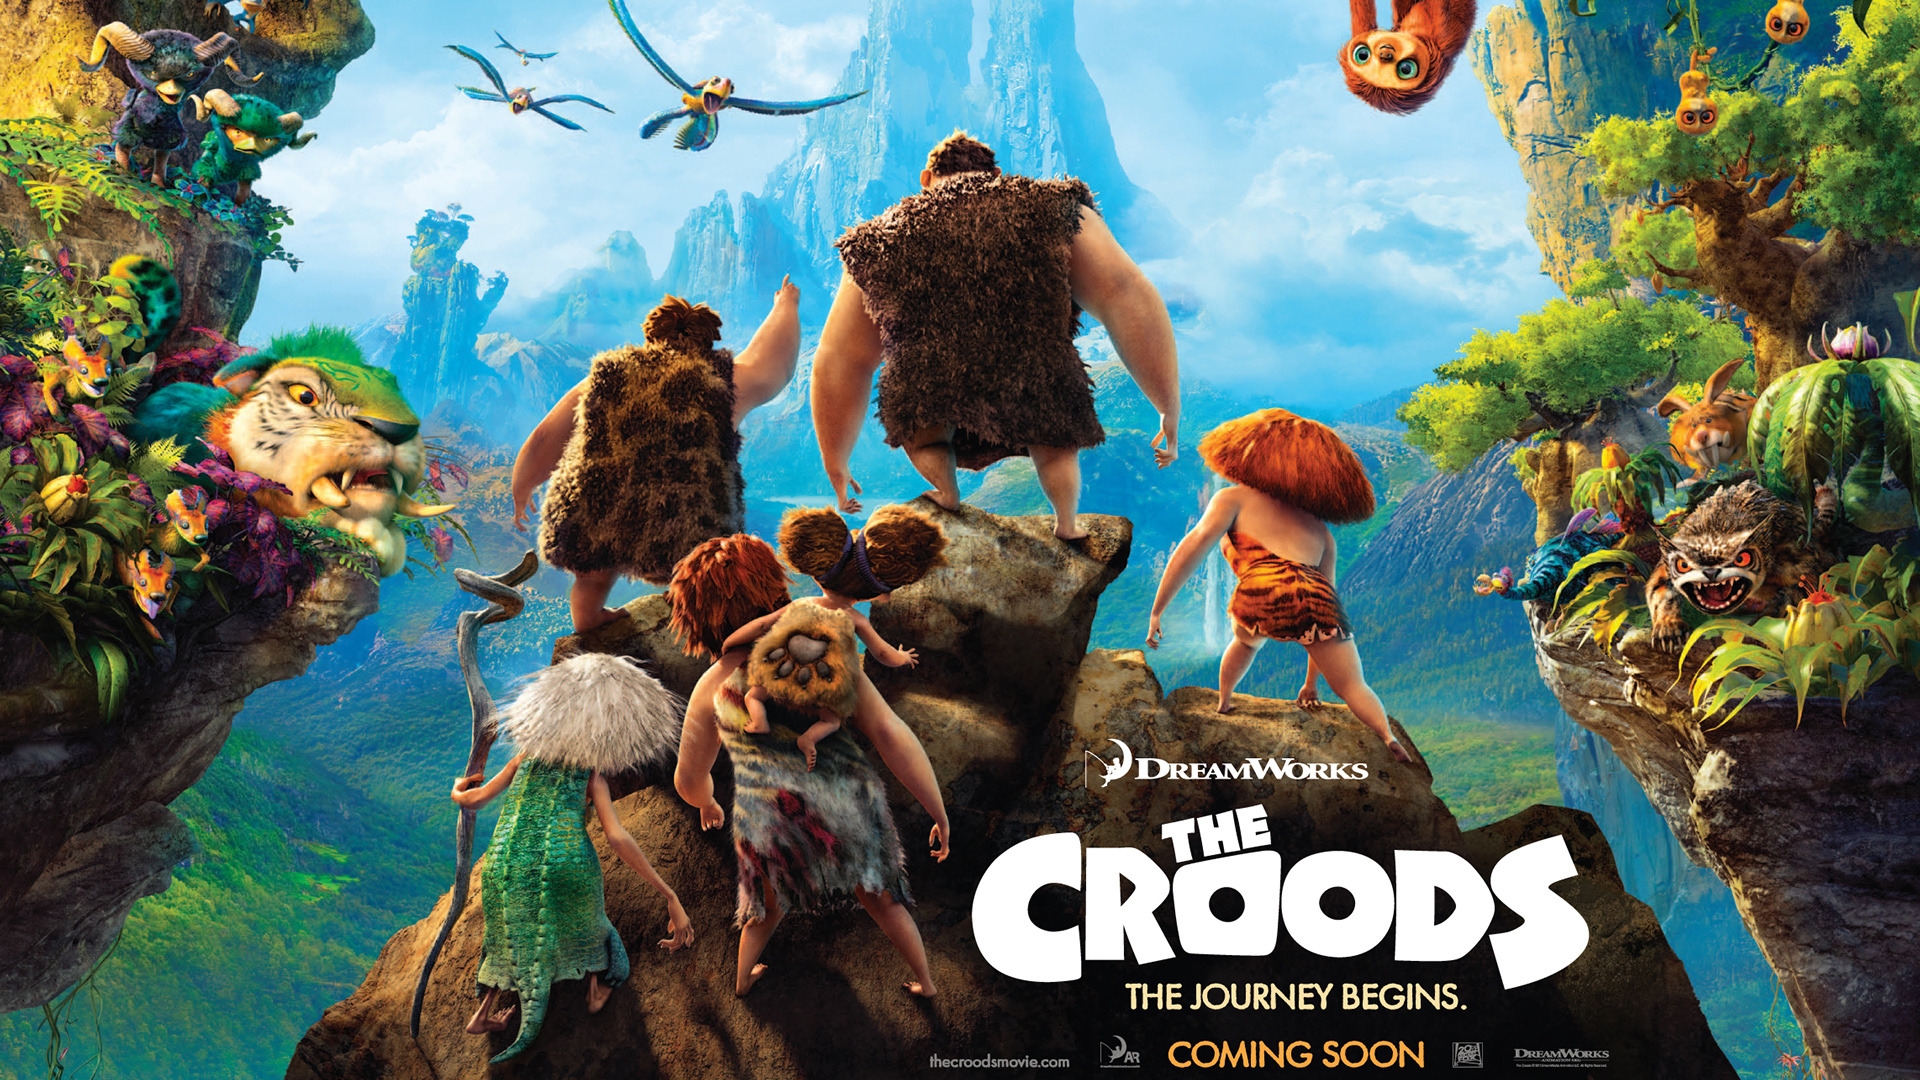 The Croods 2013 Movie for 1920 x 1080 HDTV 1080p resolution